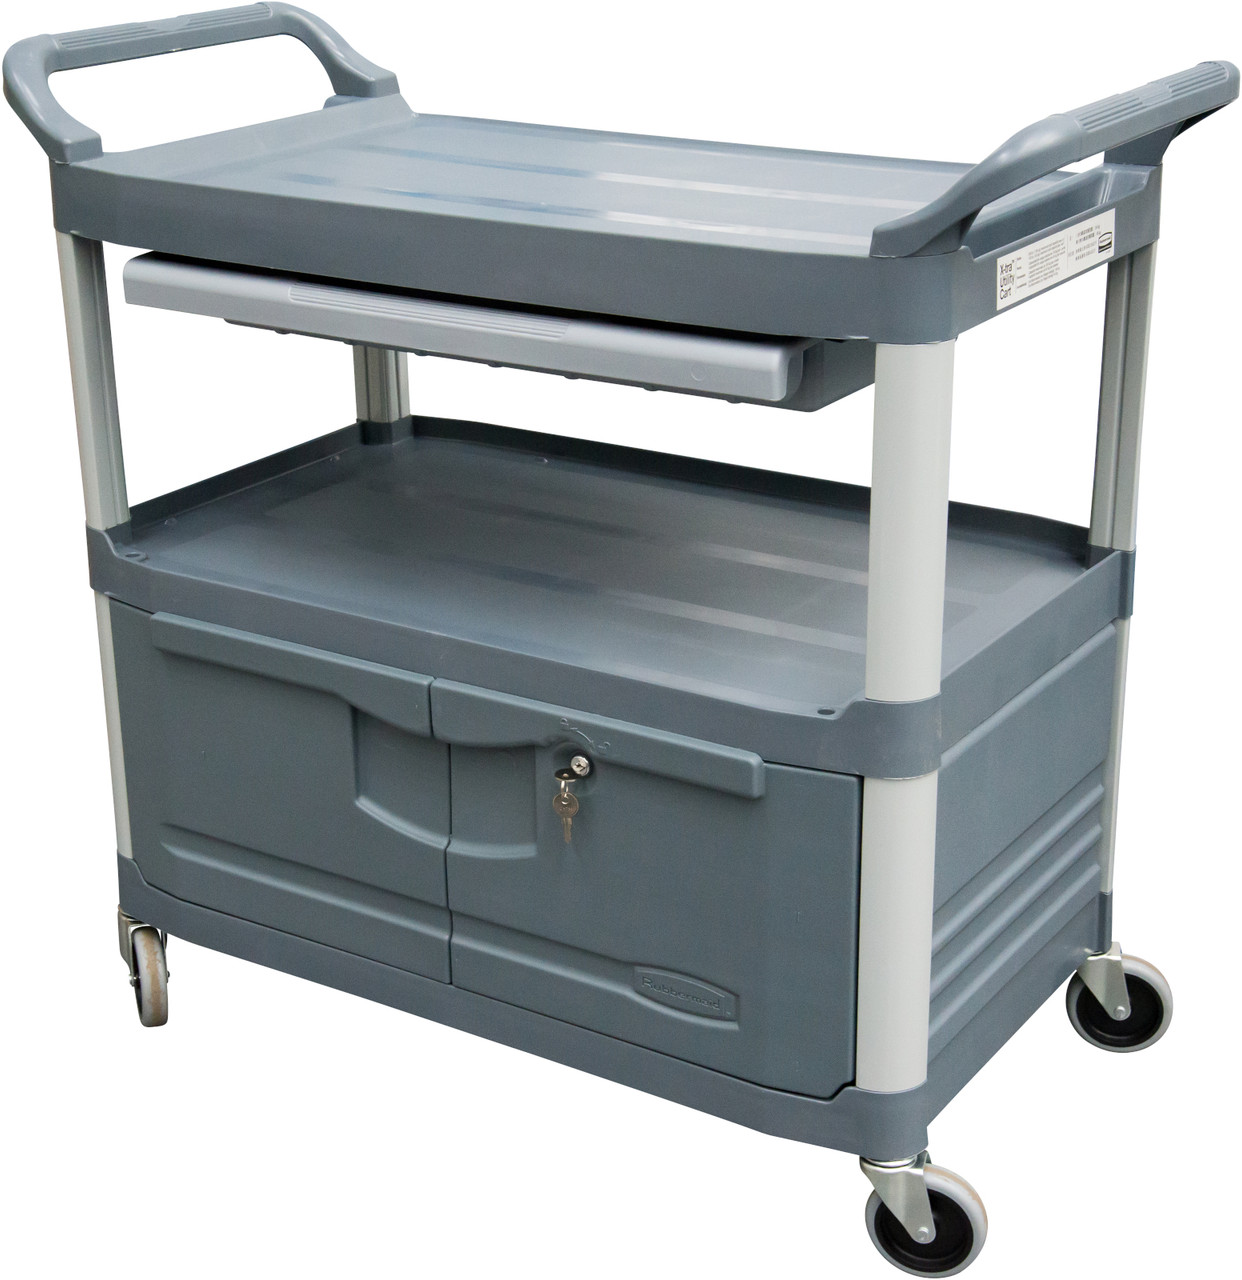 FG409400GRAY - Rubbermaid X-Tra Cart with Drawer & Cabinet - Grey